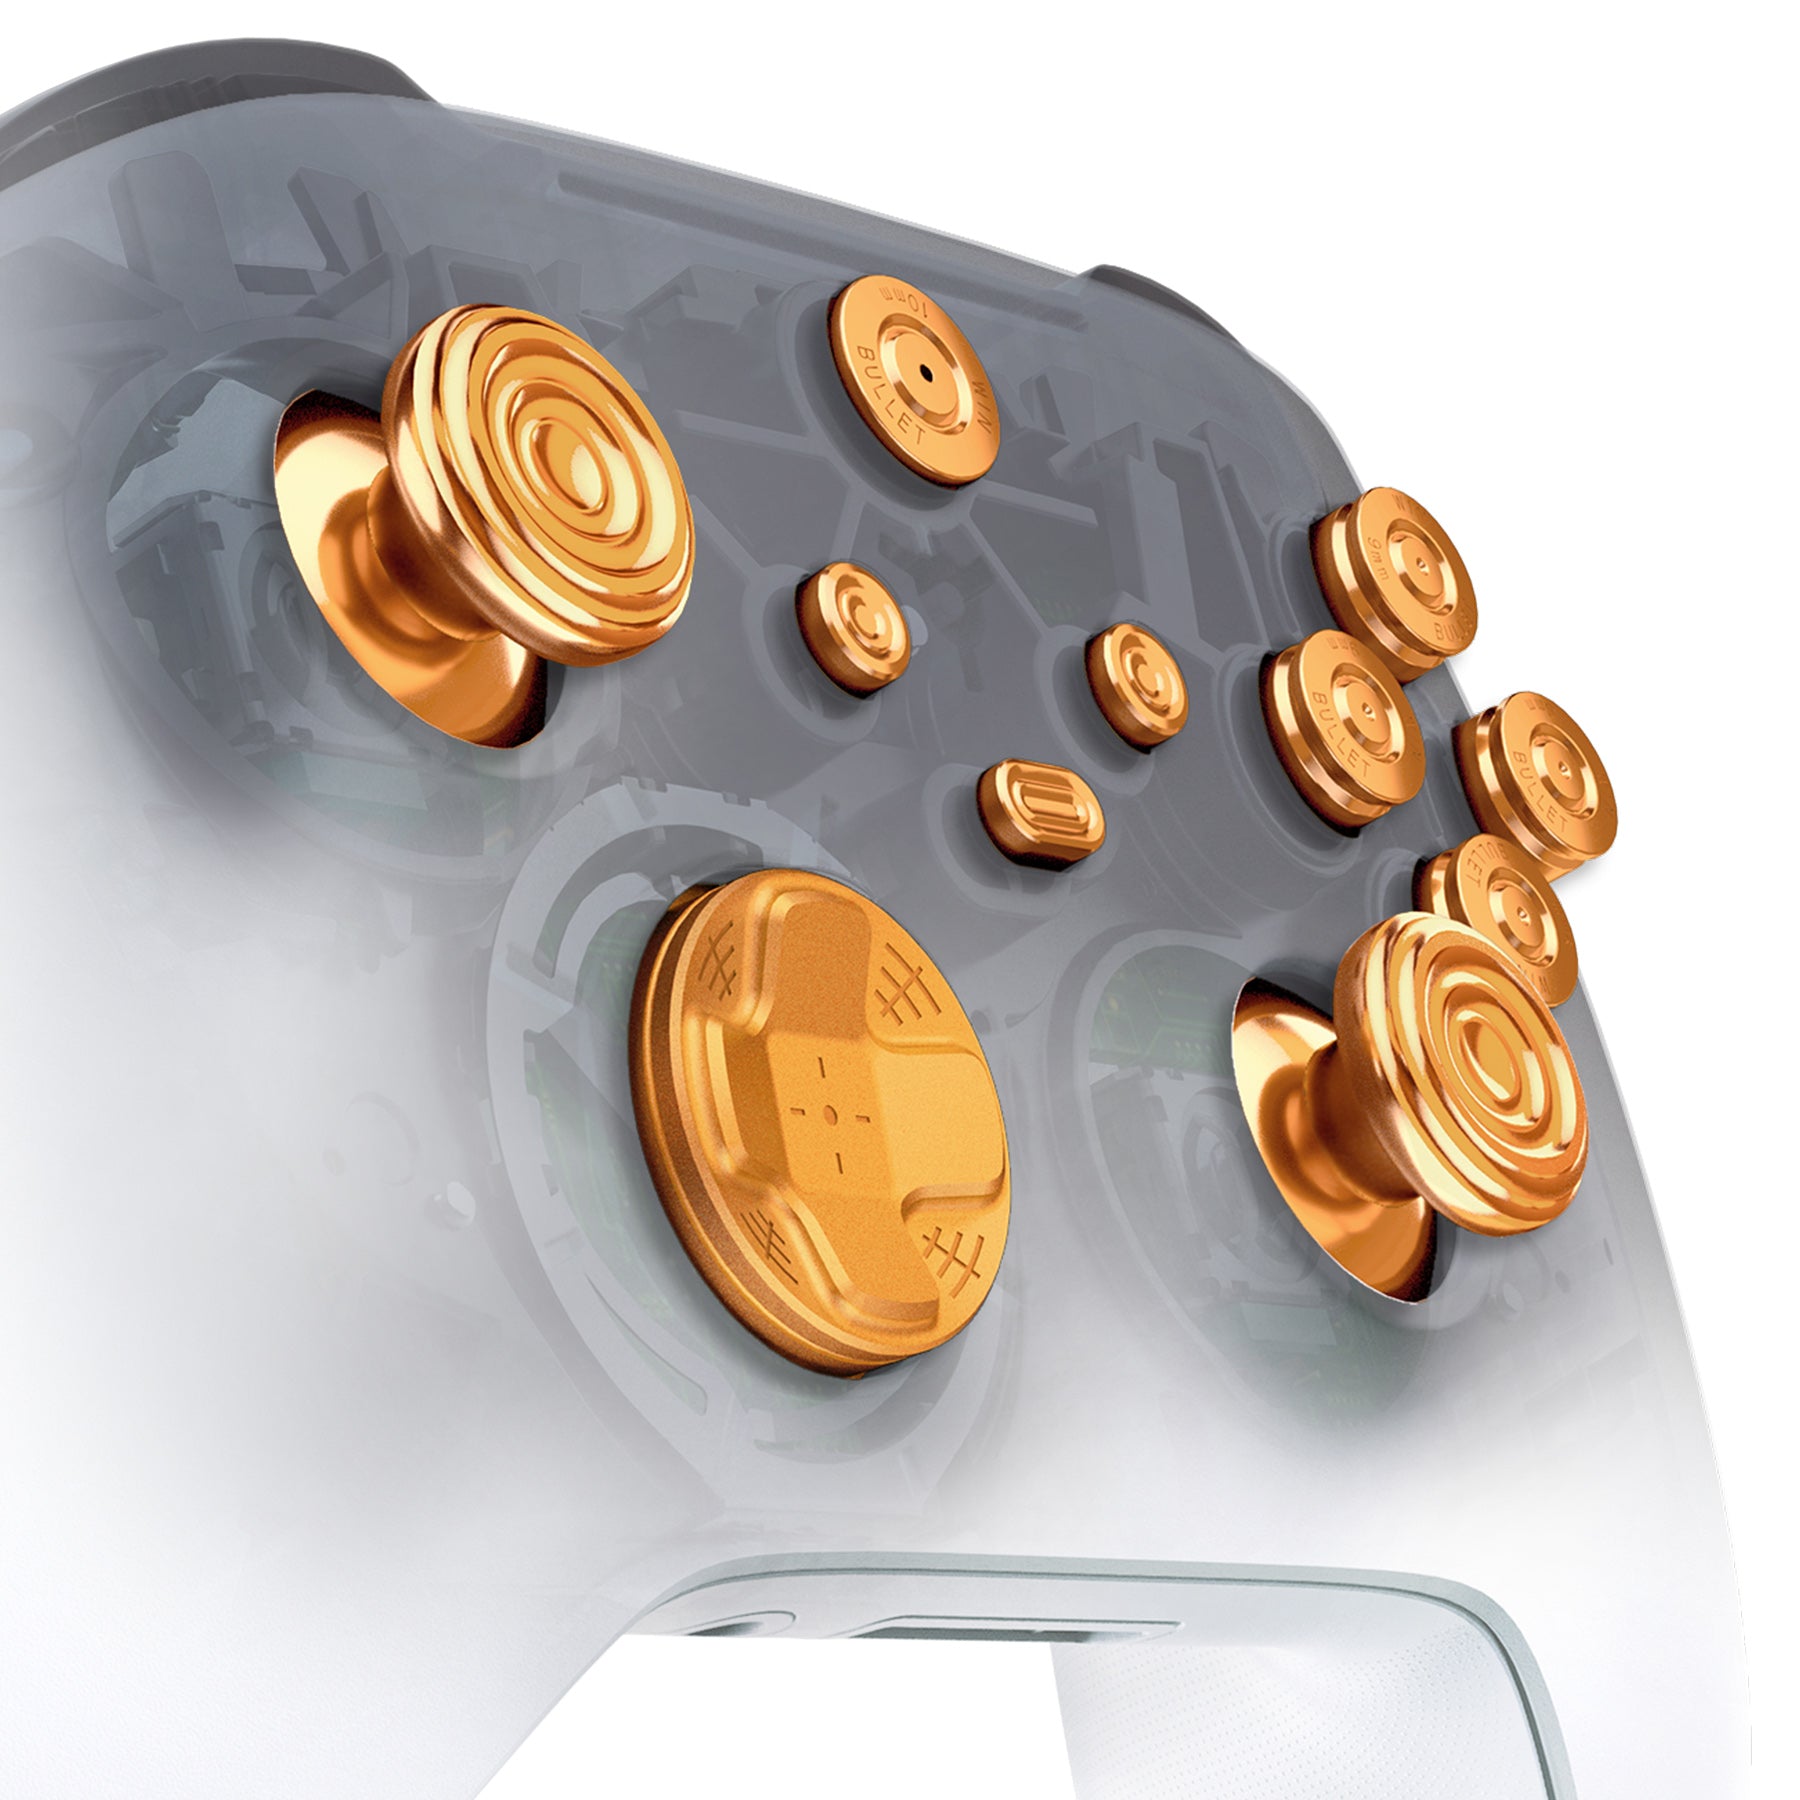 eXtremeRate 11 in 1 Custom Gold Metal Buttons for Xbox Series X/S Controller, Aluminum Alloy Dpad Start Back Share Button, Replacement Thumbsticks